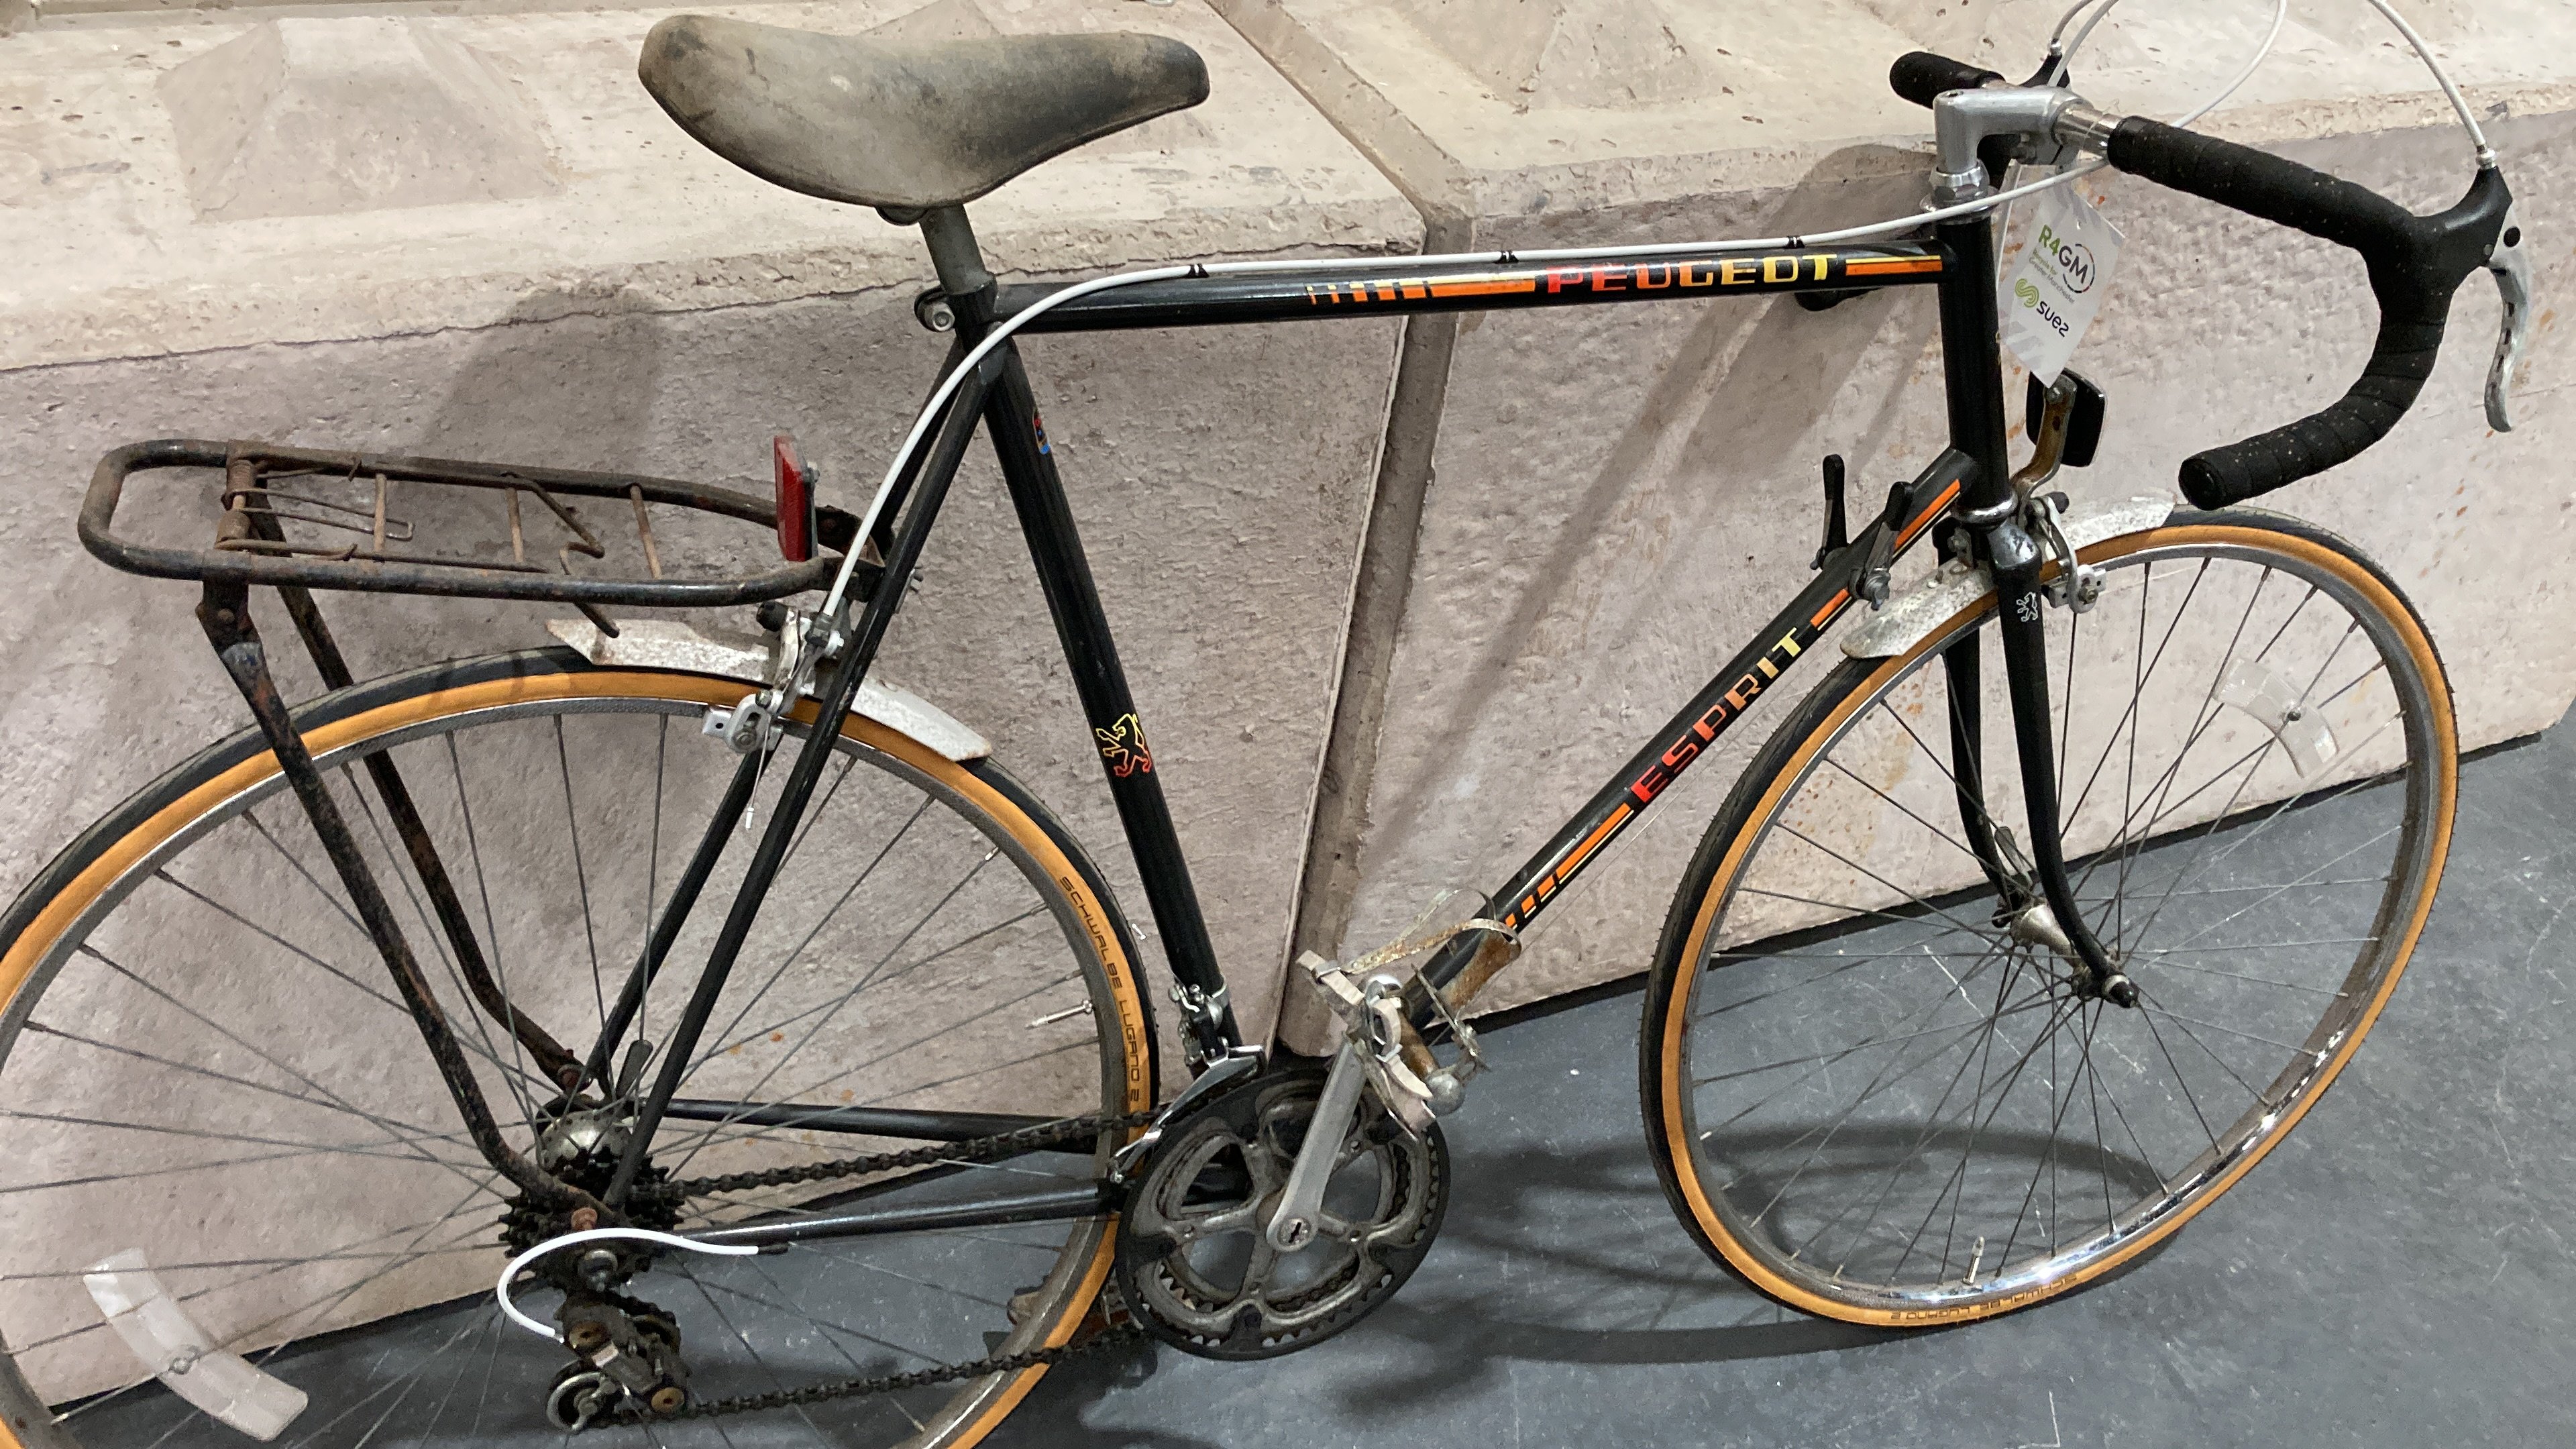 A well-worn Peugeot bike with black handlebars, a very faded saddle, and very 80's decals along the side.